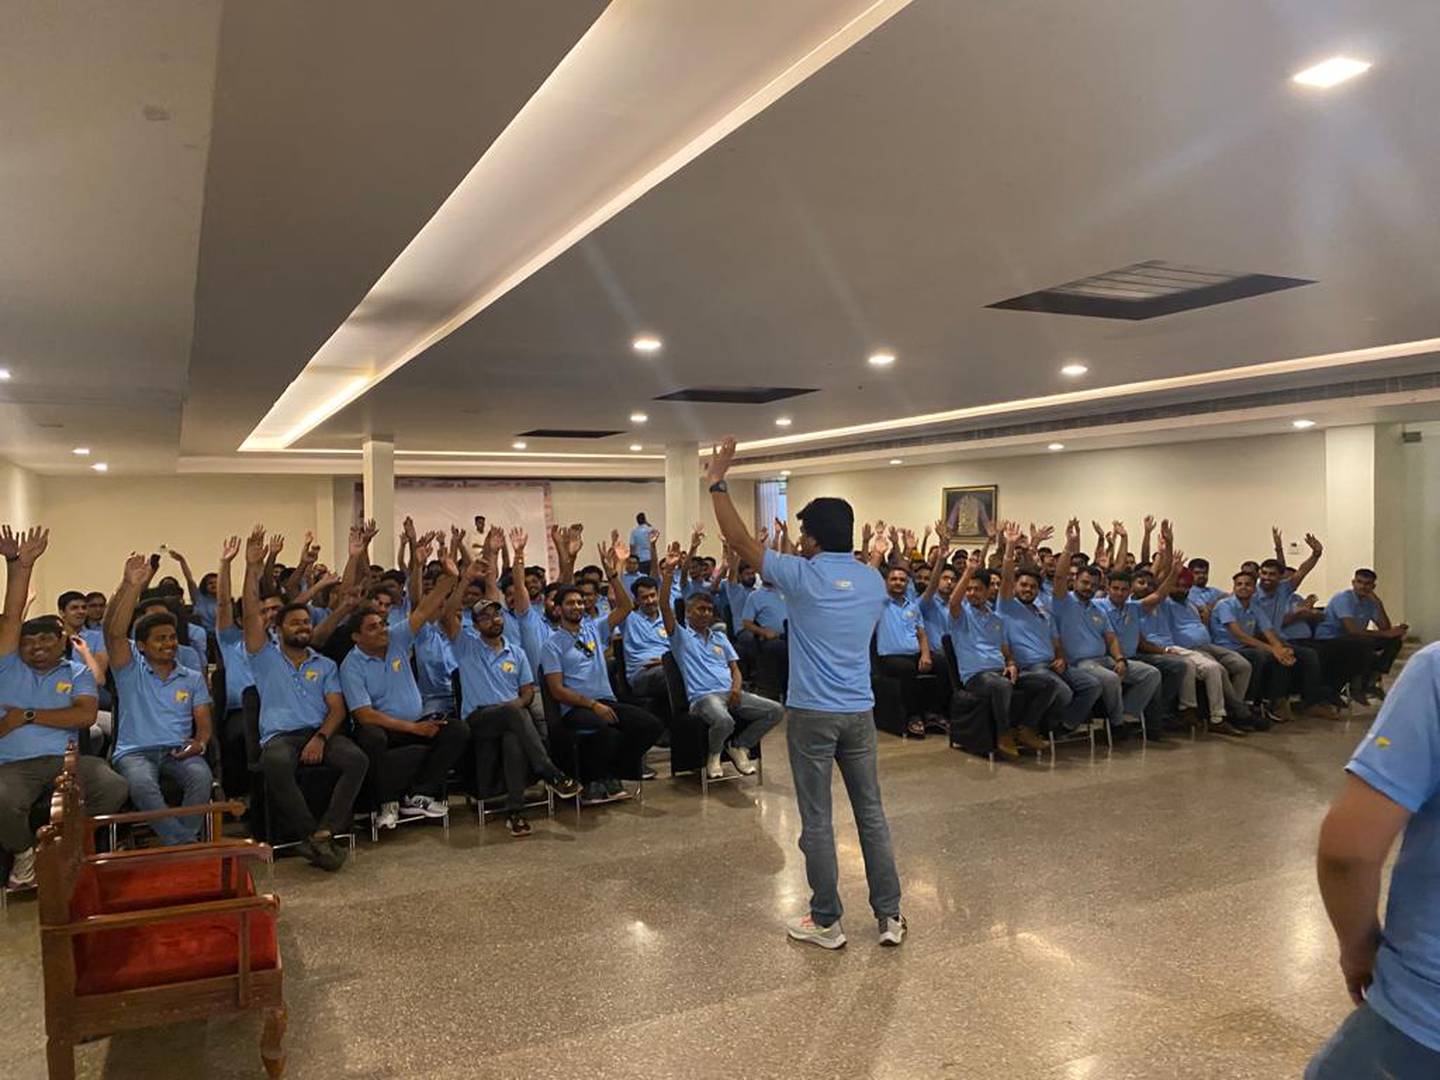 Flipkart's supply chain employees from Haryana and Punjab have a meeting ahead of the Diwali festive season and the Indian e-tailer's The Big Billion Days sale in 2022.